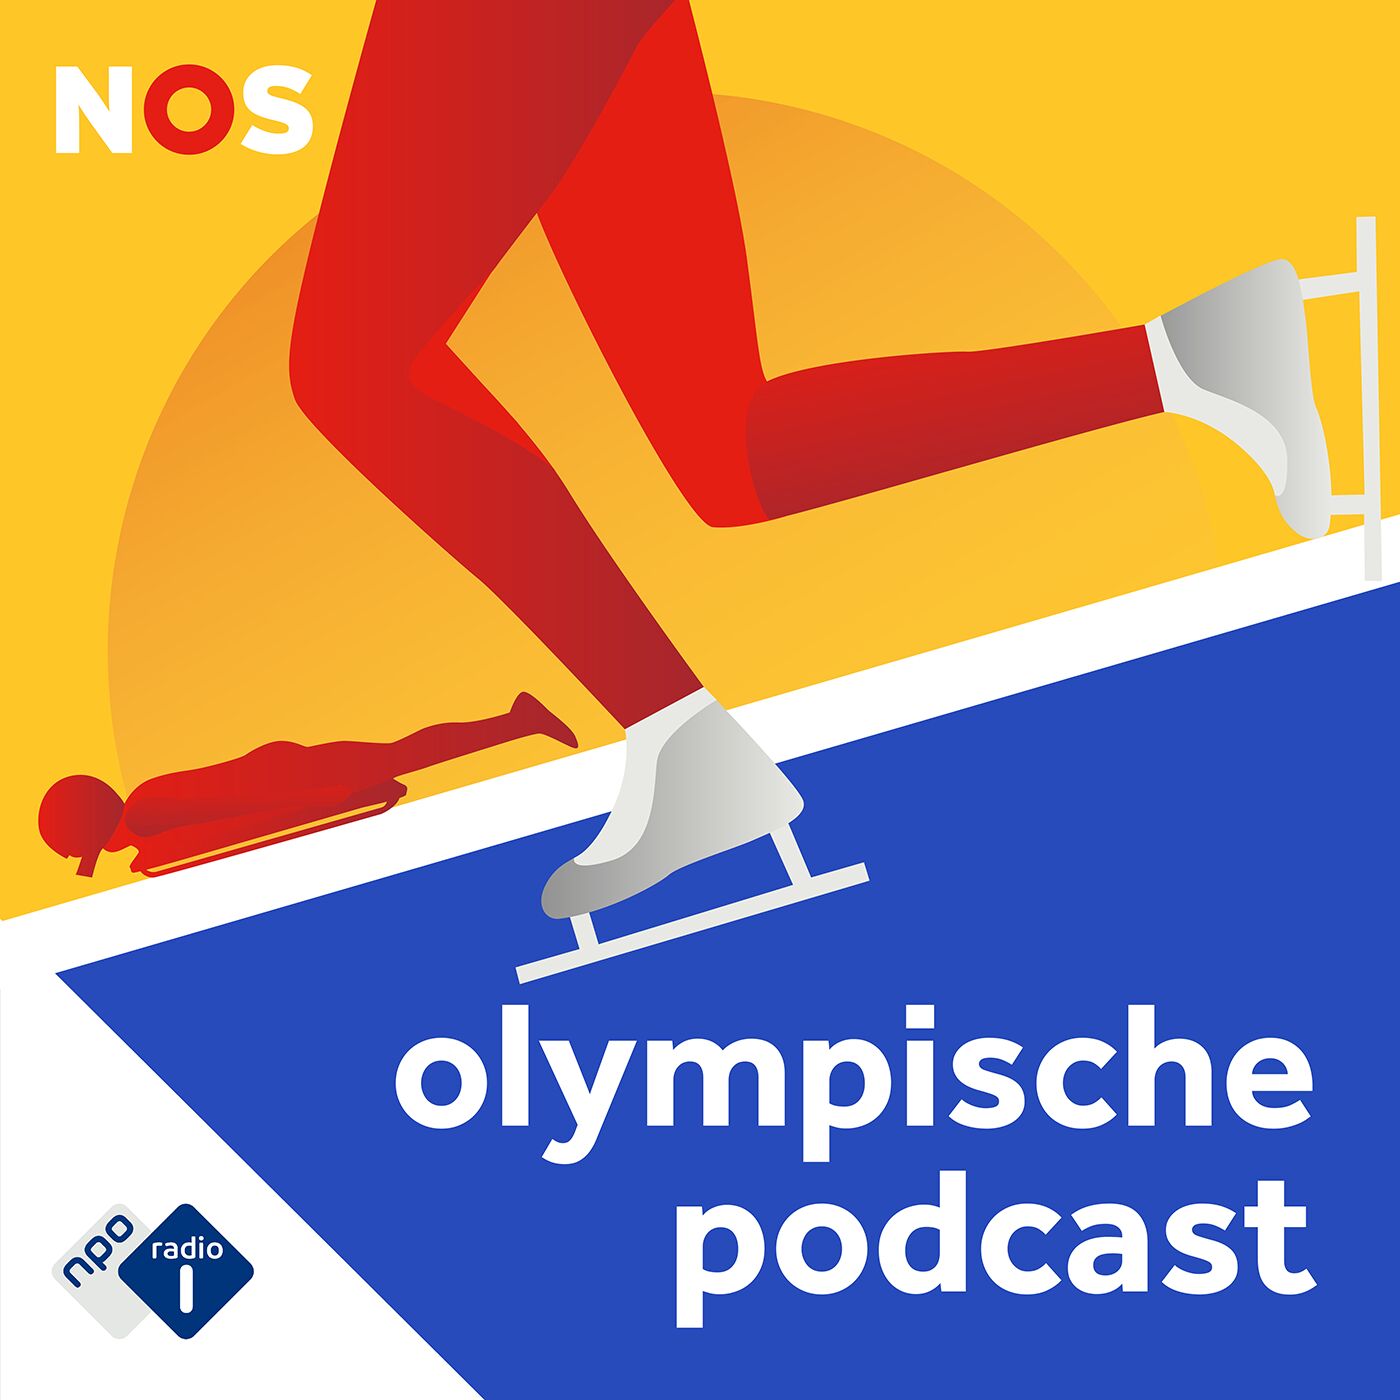 NOS Olympische podcast podcast show image